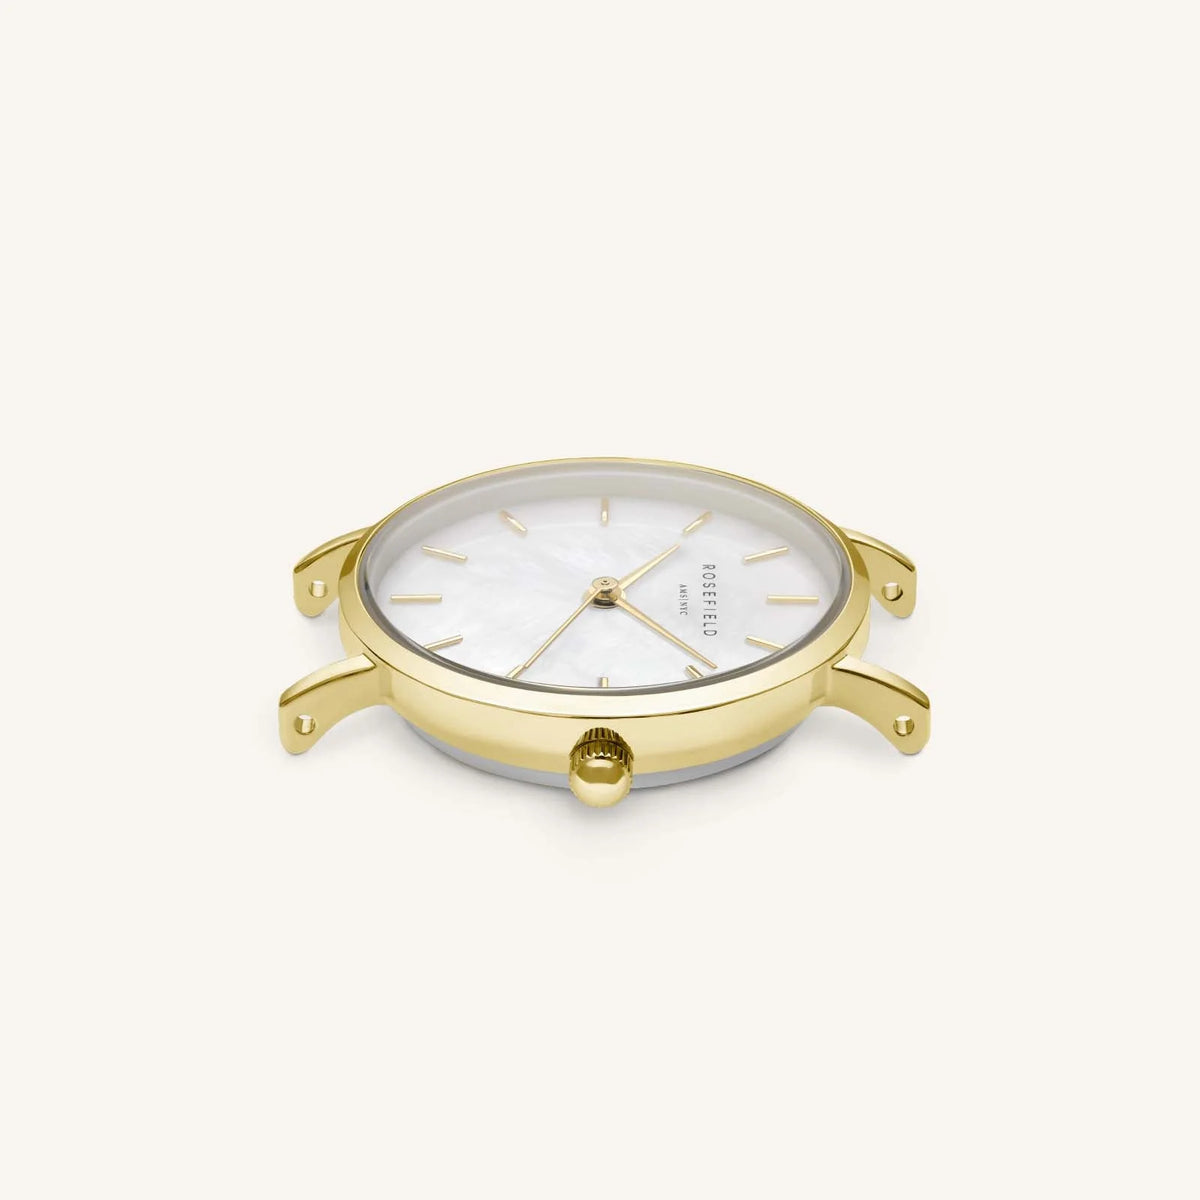 Rosefield  Small Edit -  Gold Mesh Strap- Escape Clothing